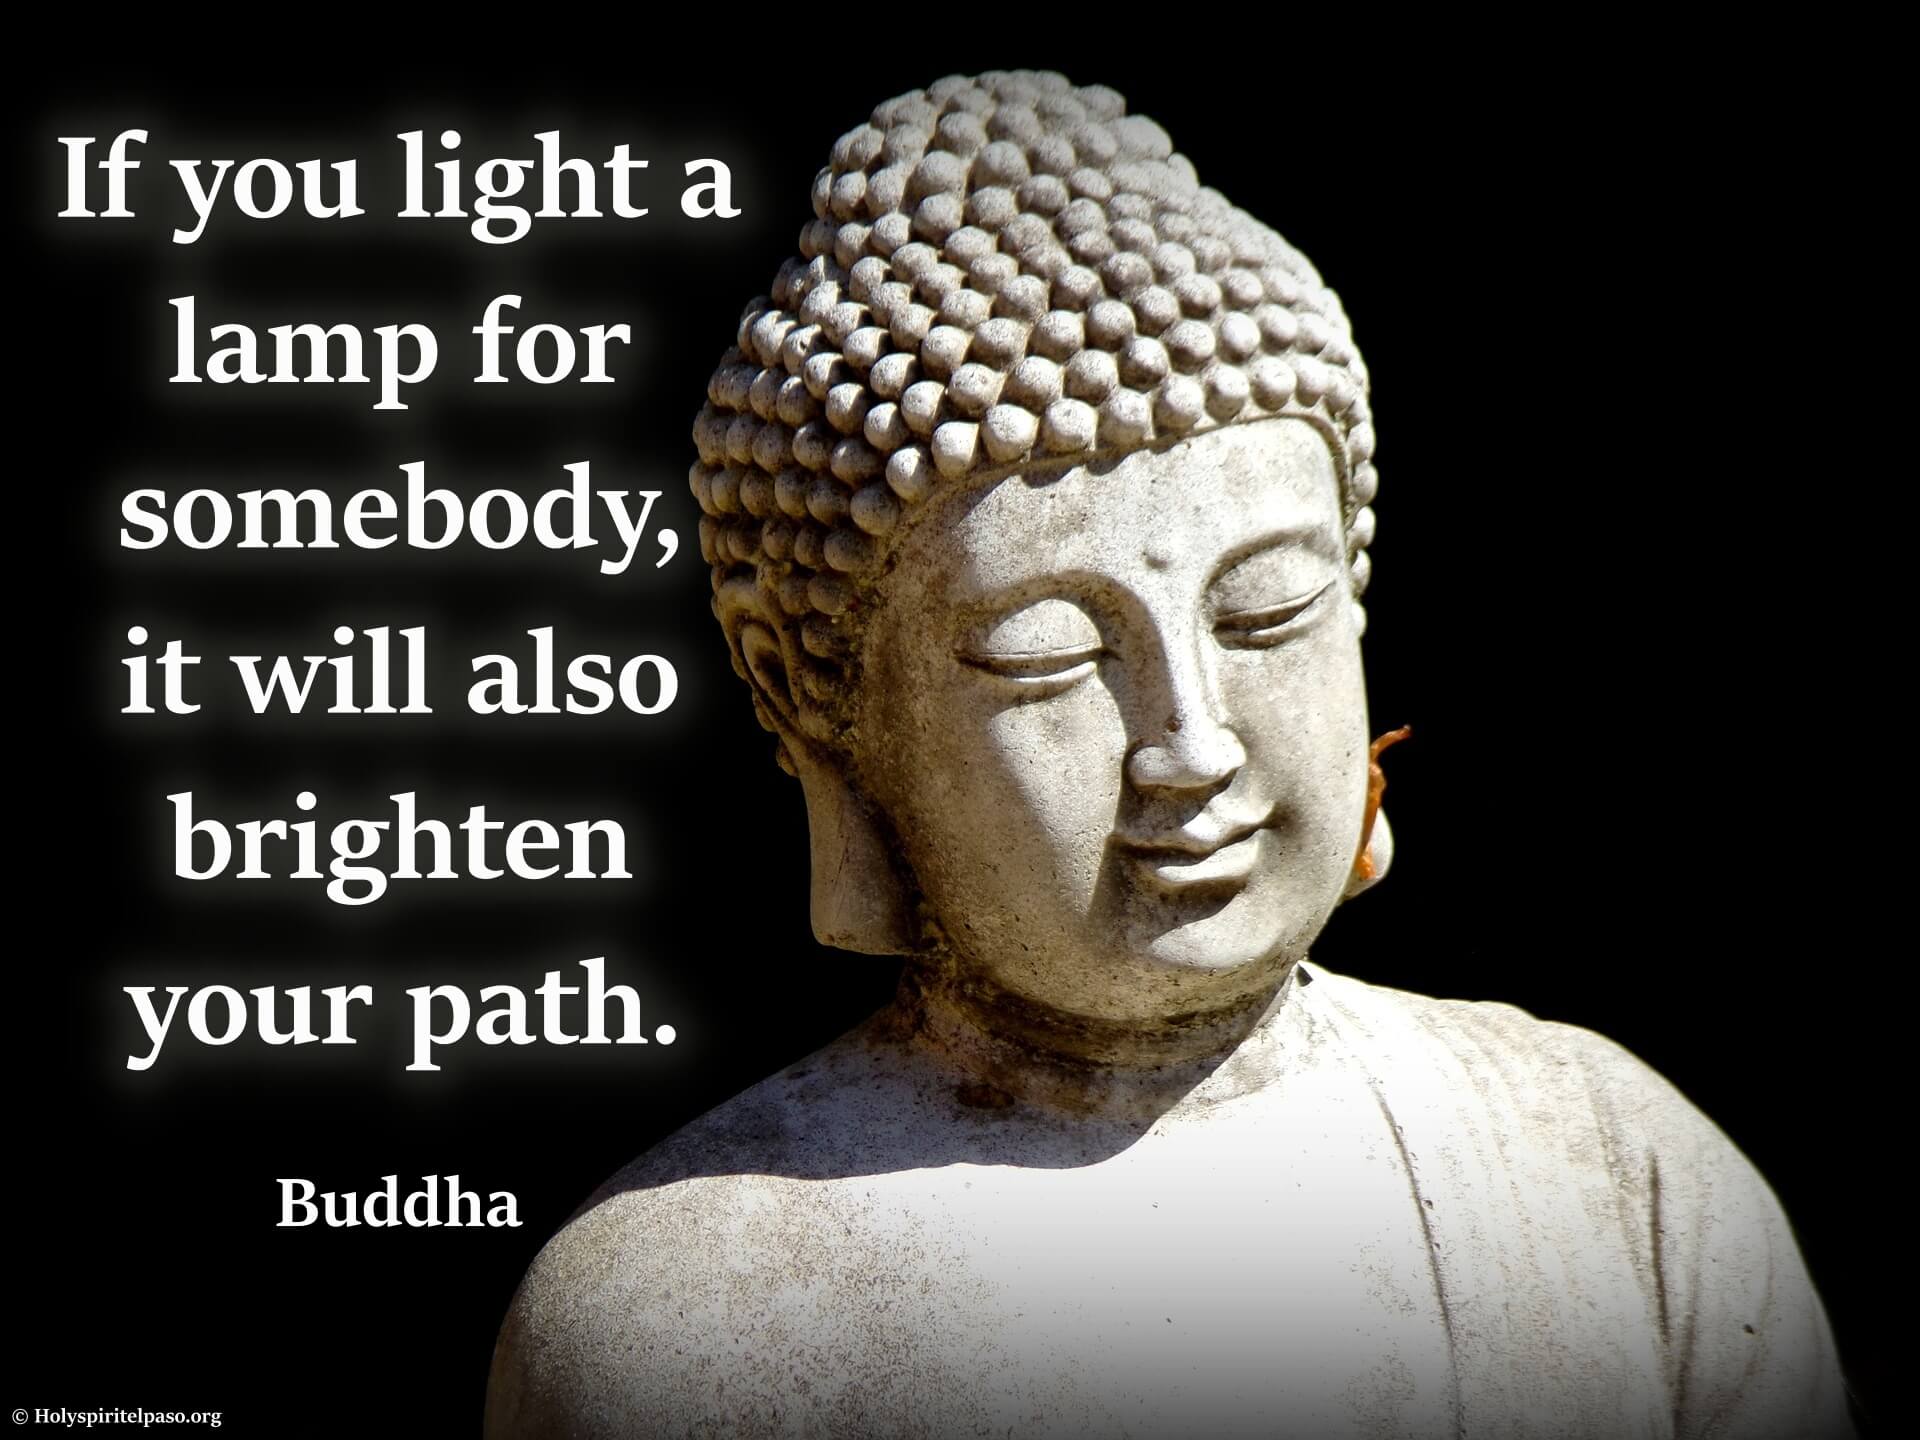 Quotes From Buddha On Love - Cocharity